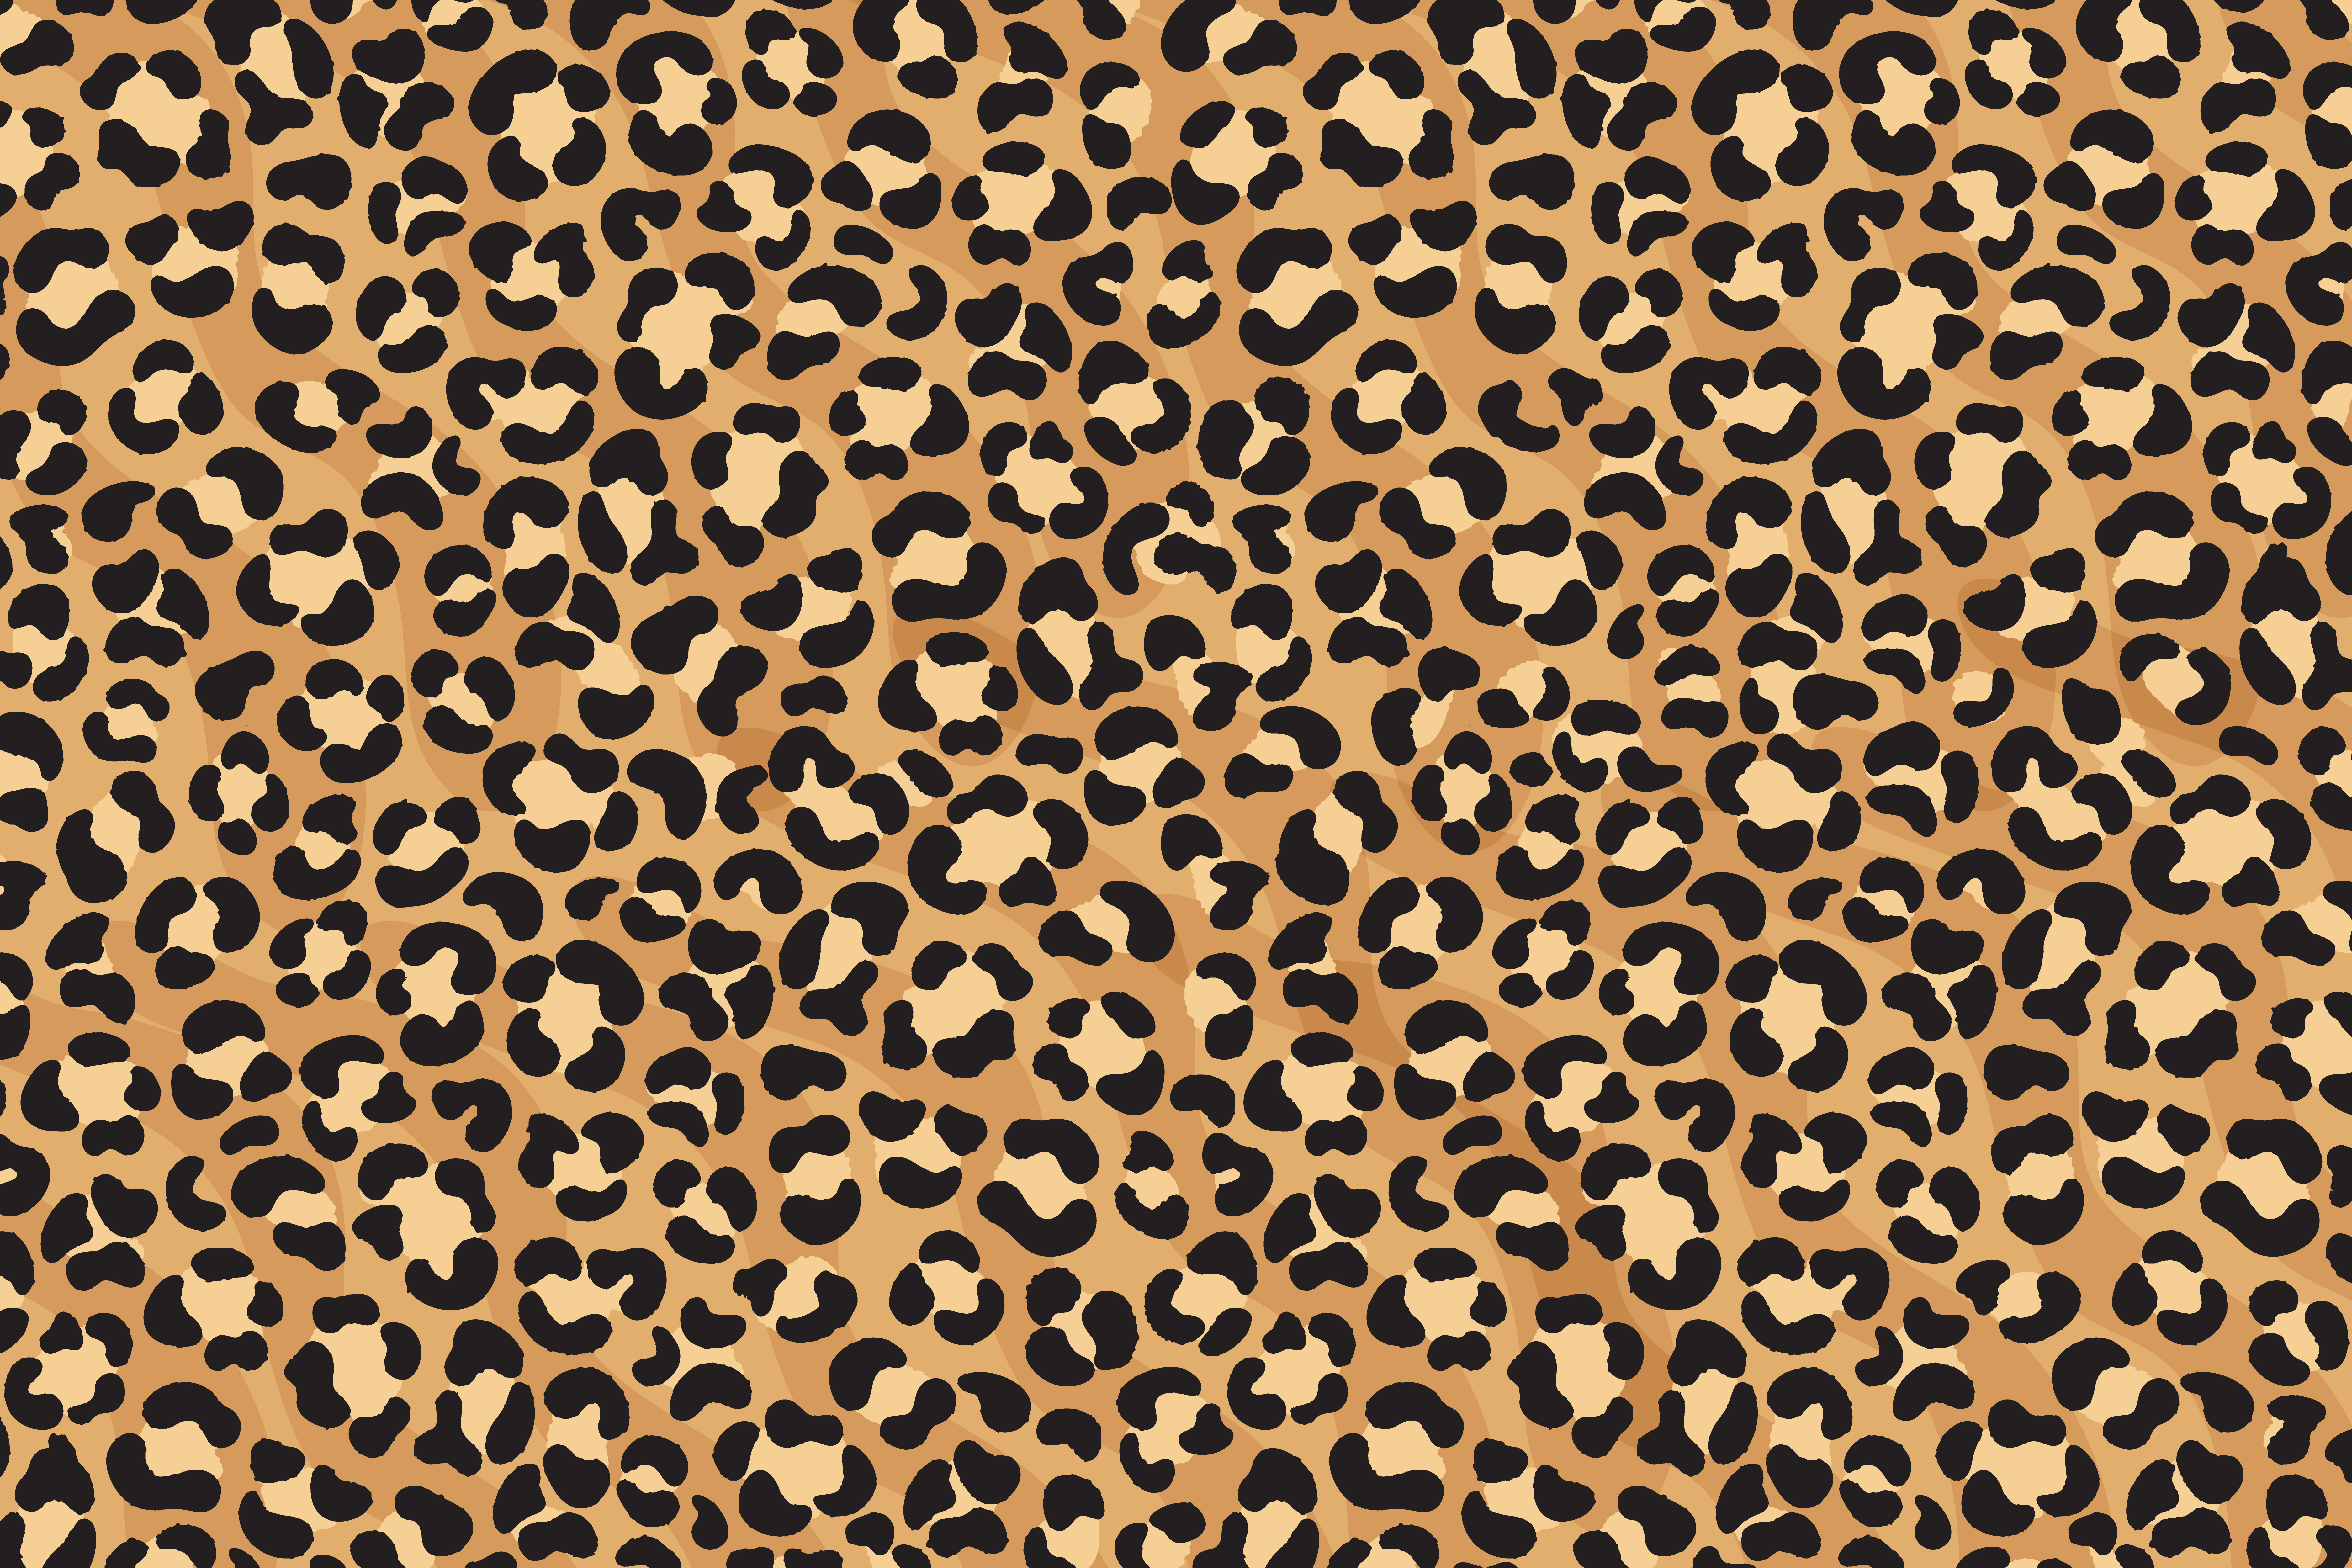 Browse 1,152 incredible Cheetah Pattern vectors, icons, clipart graphics, a...